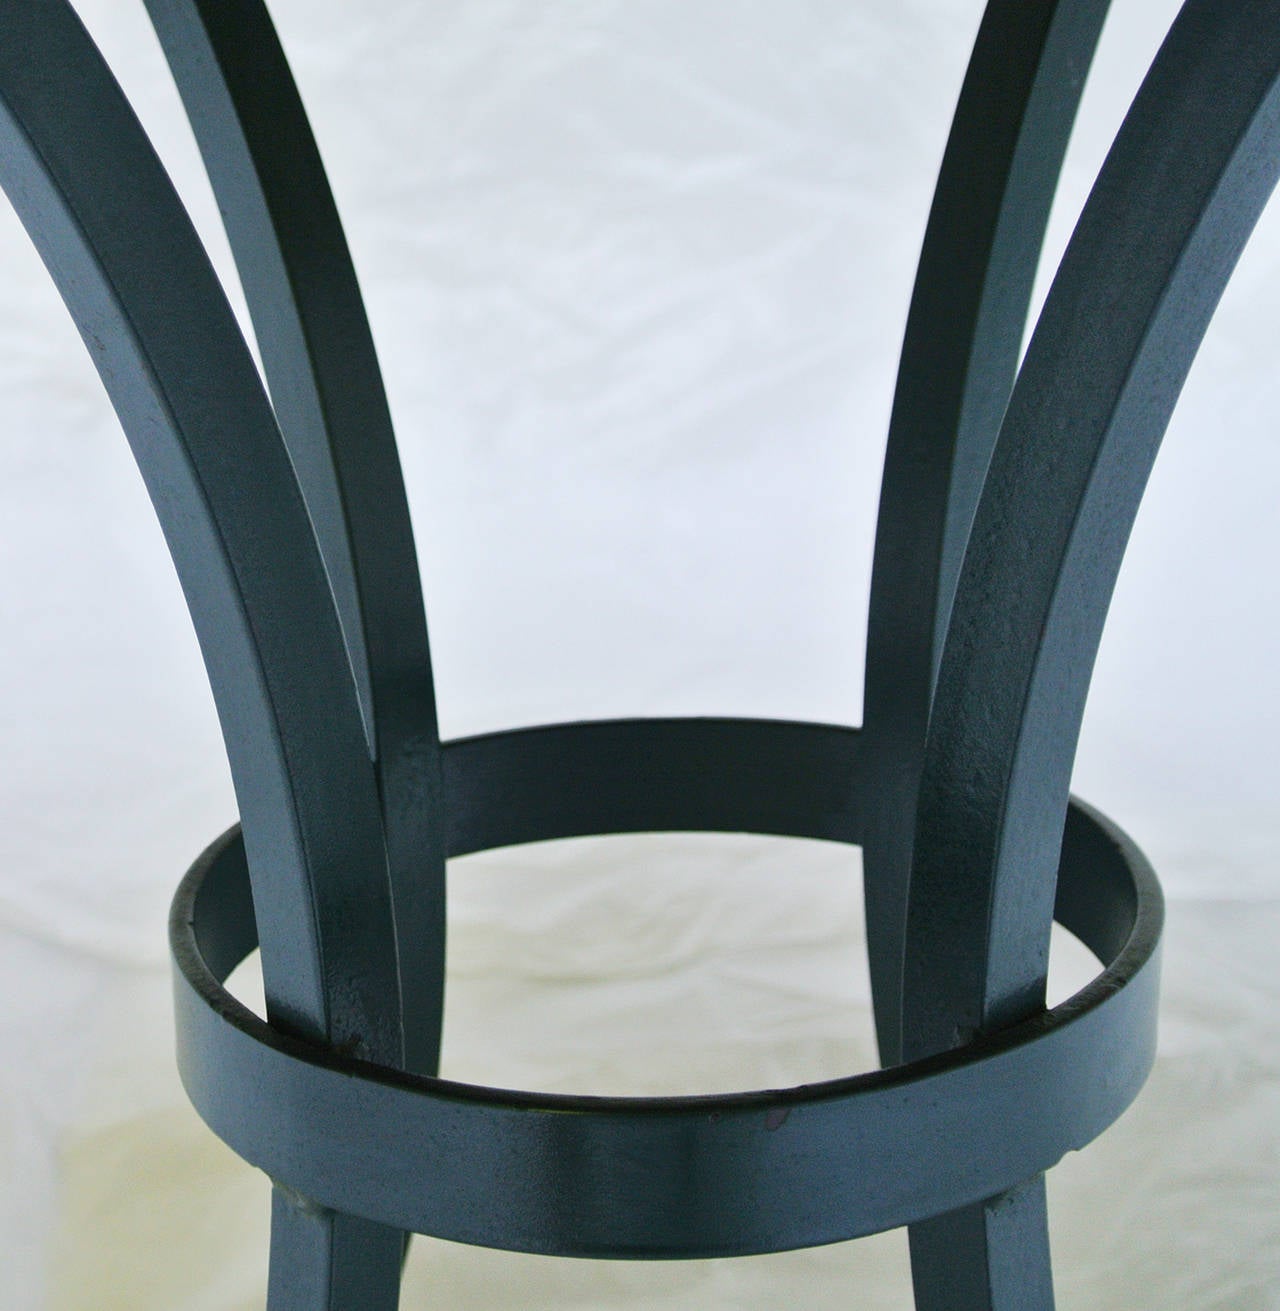 Cleo Baldon Wrought Iron and Oak Table and Four Chairs, circa 1965 at